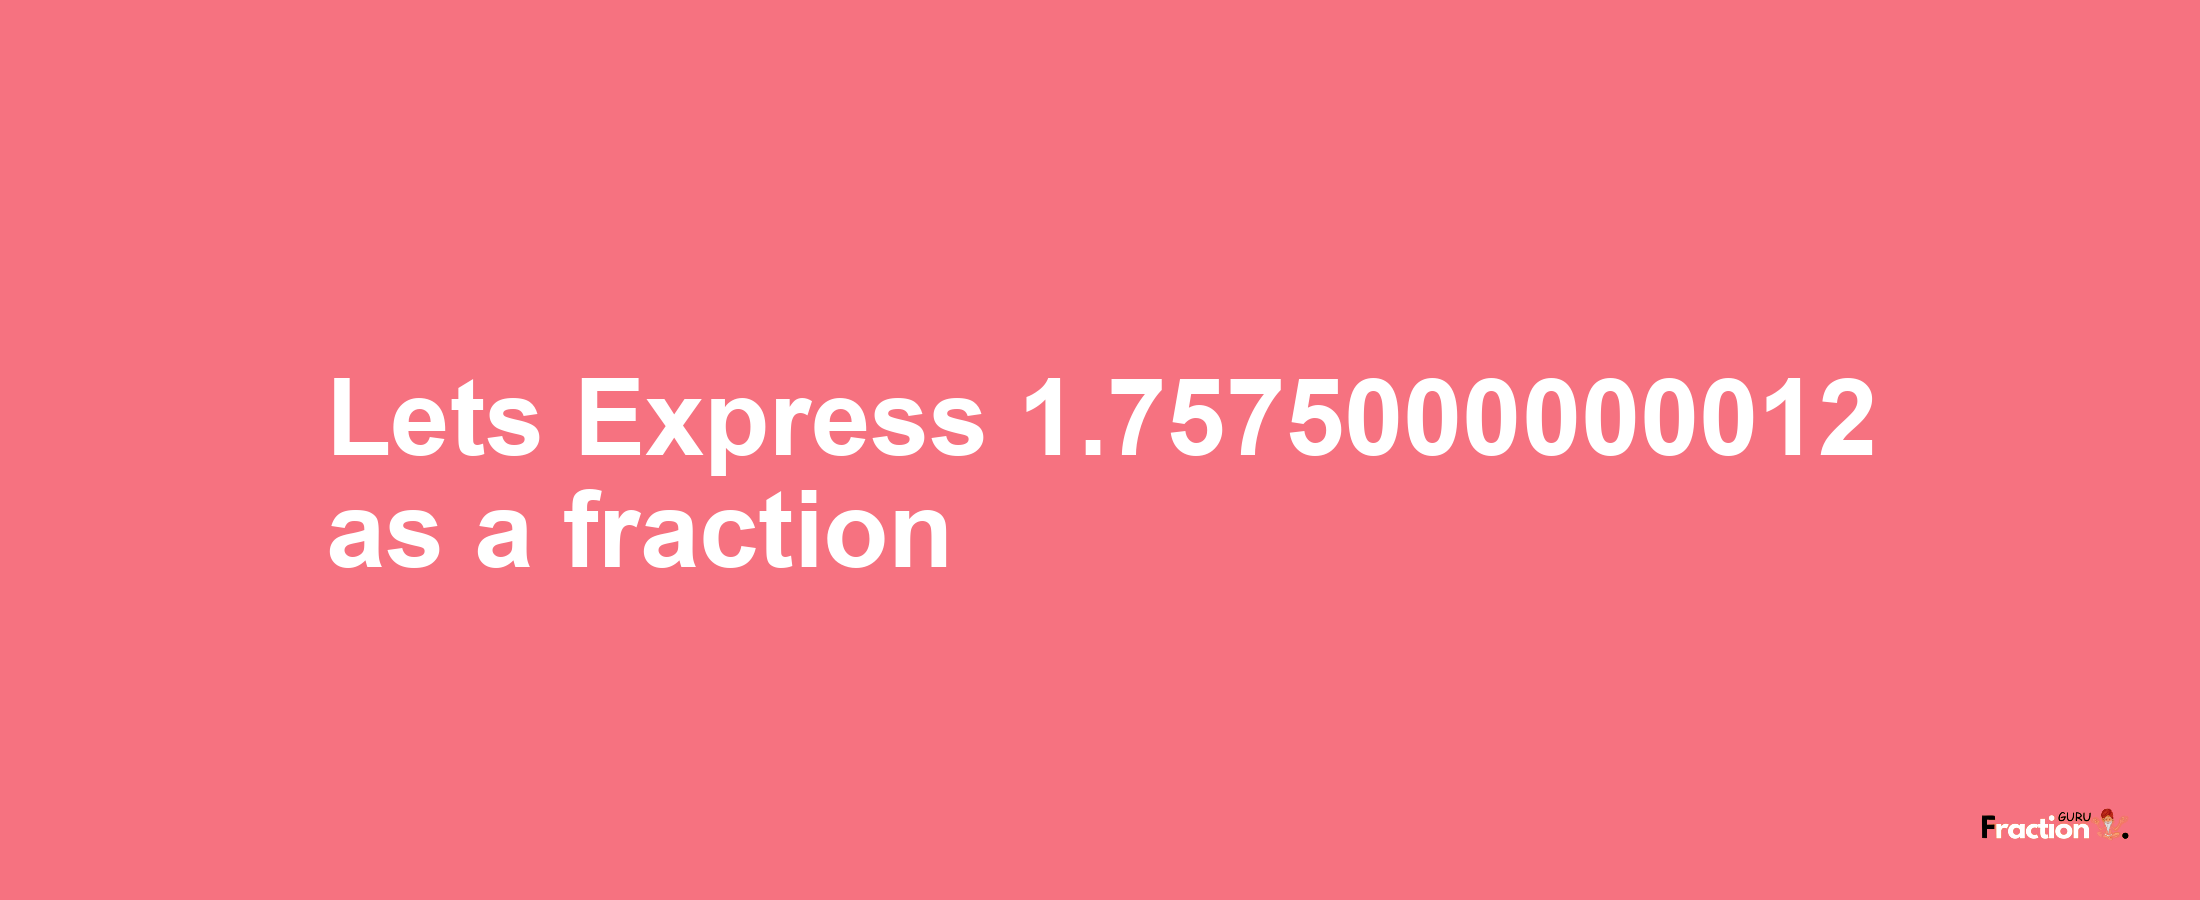 Lets Express 1.7575000000012 as afraction